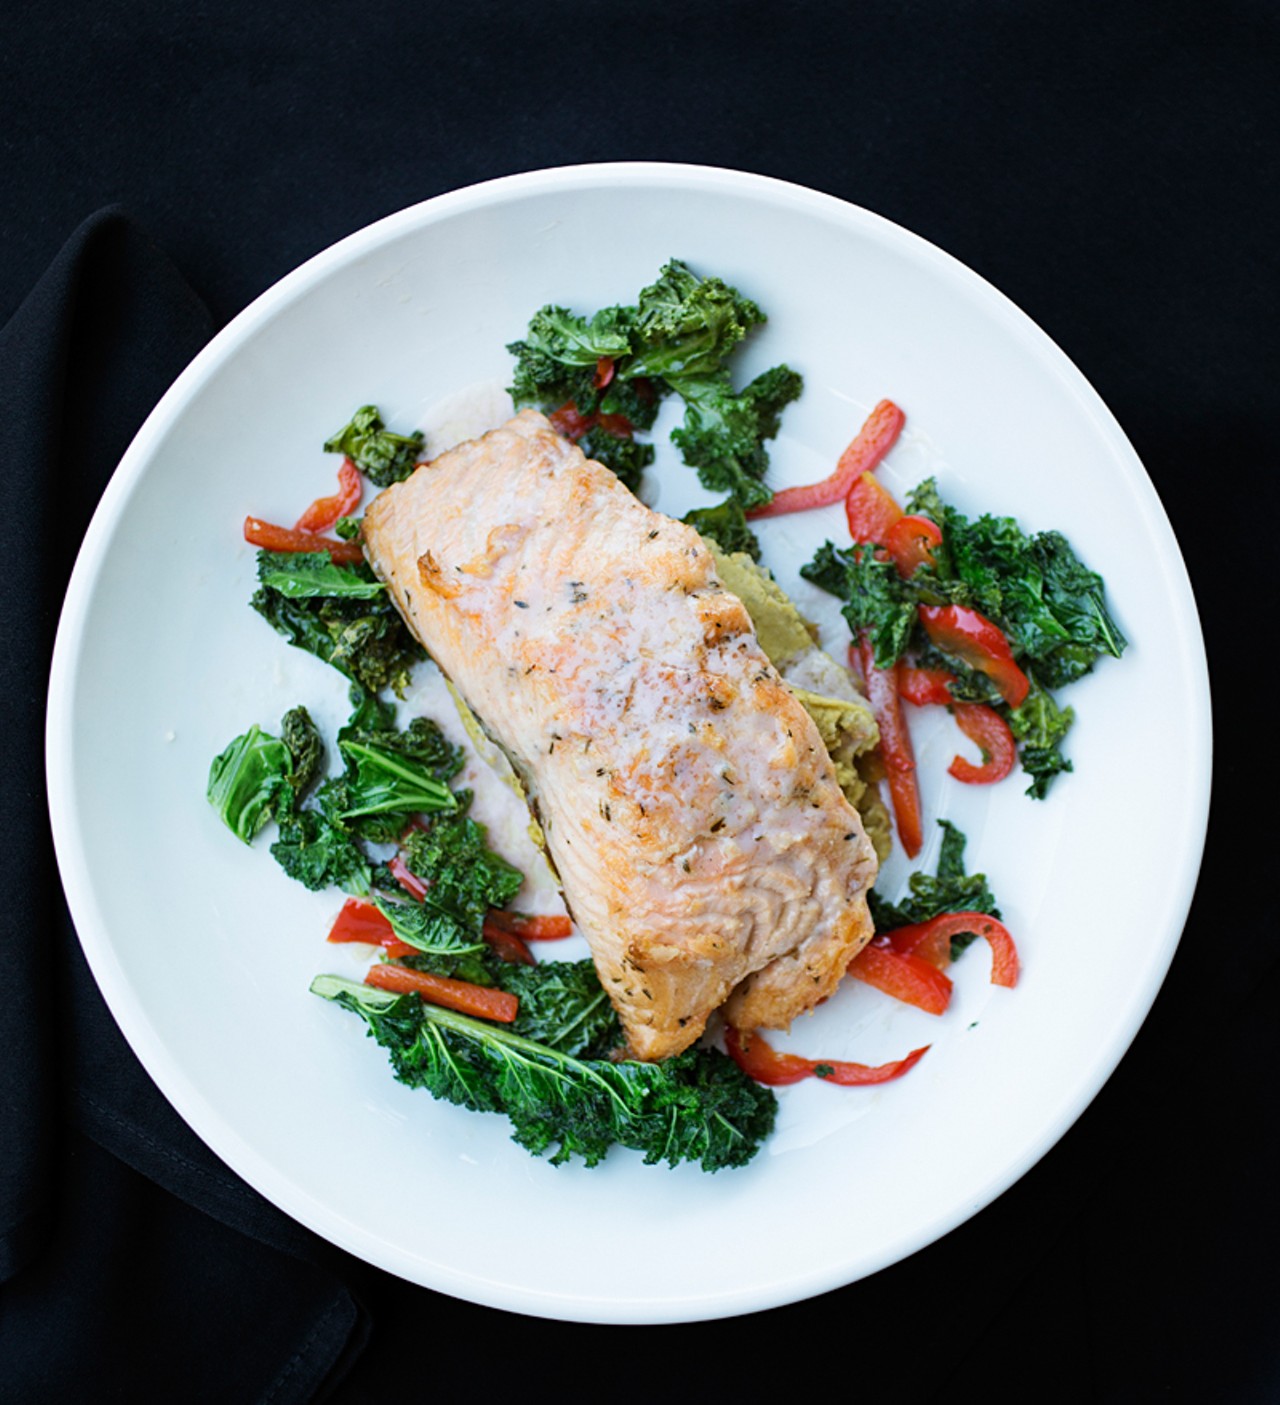 J Greene's pan-seared salmon is served with sauteed garlic kale and red peppers, chickpea puree, and a citrus beurre blanc.